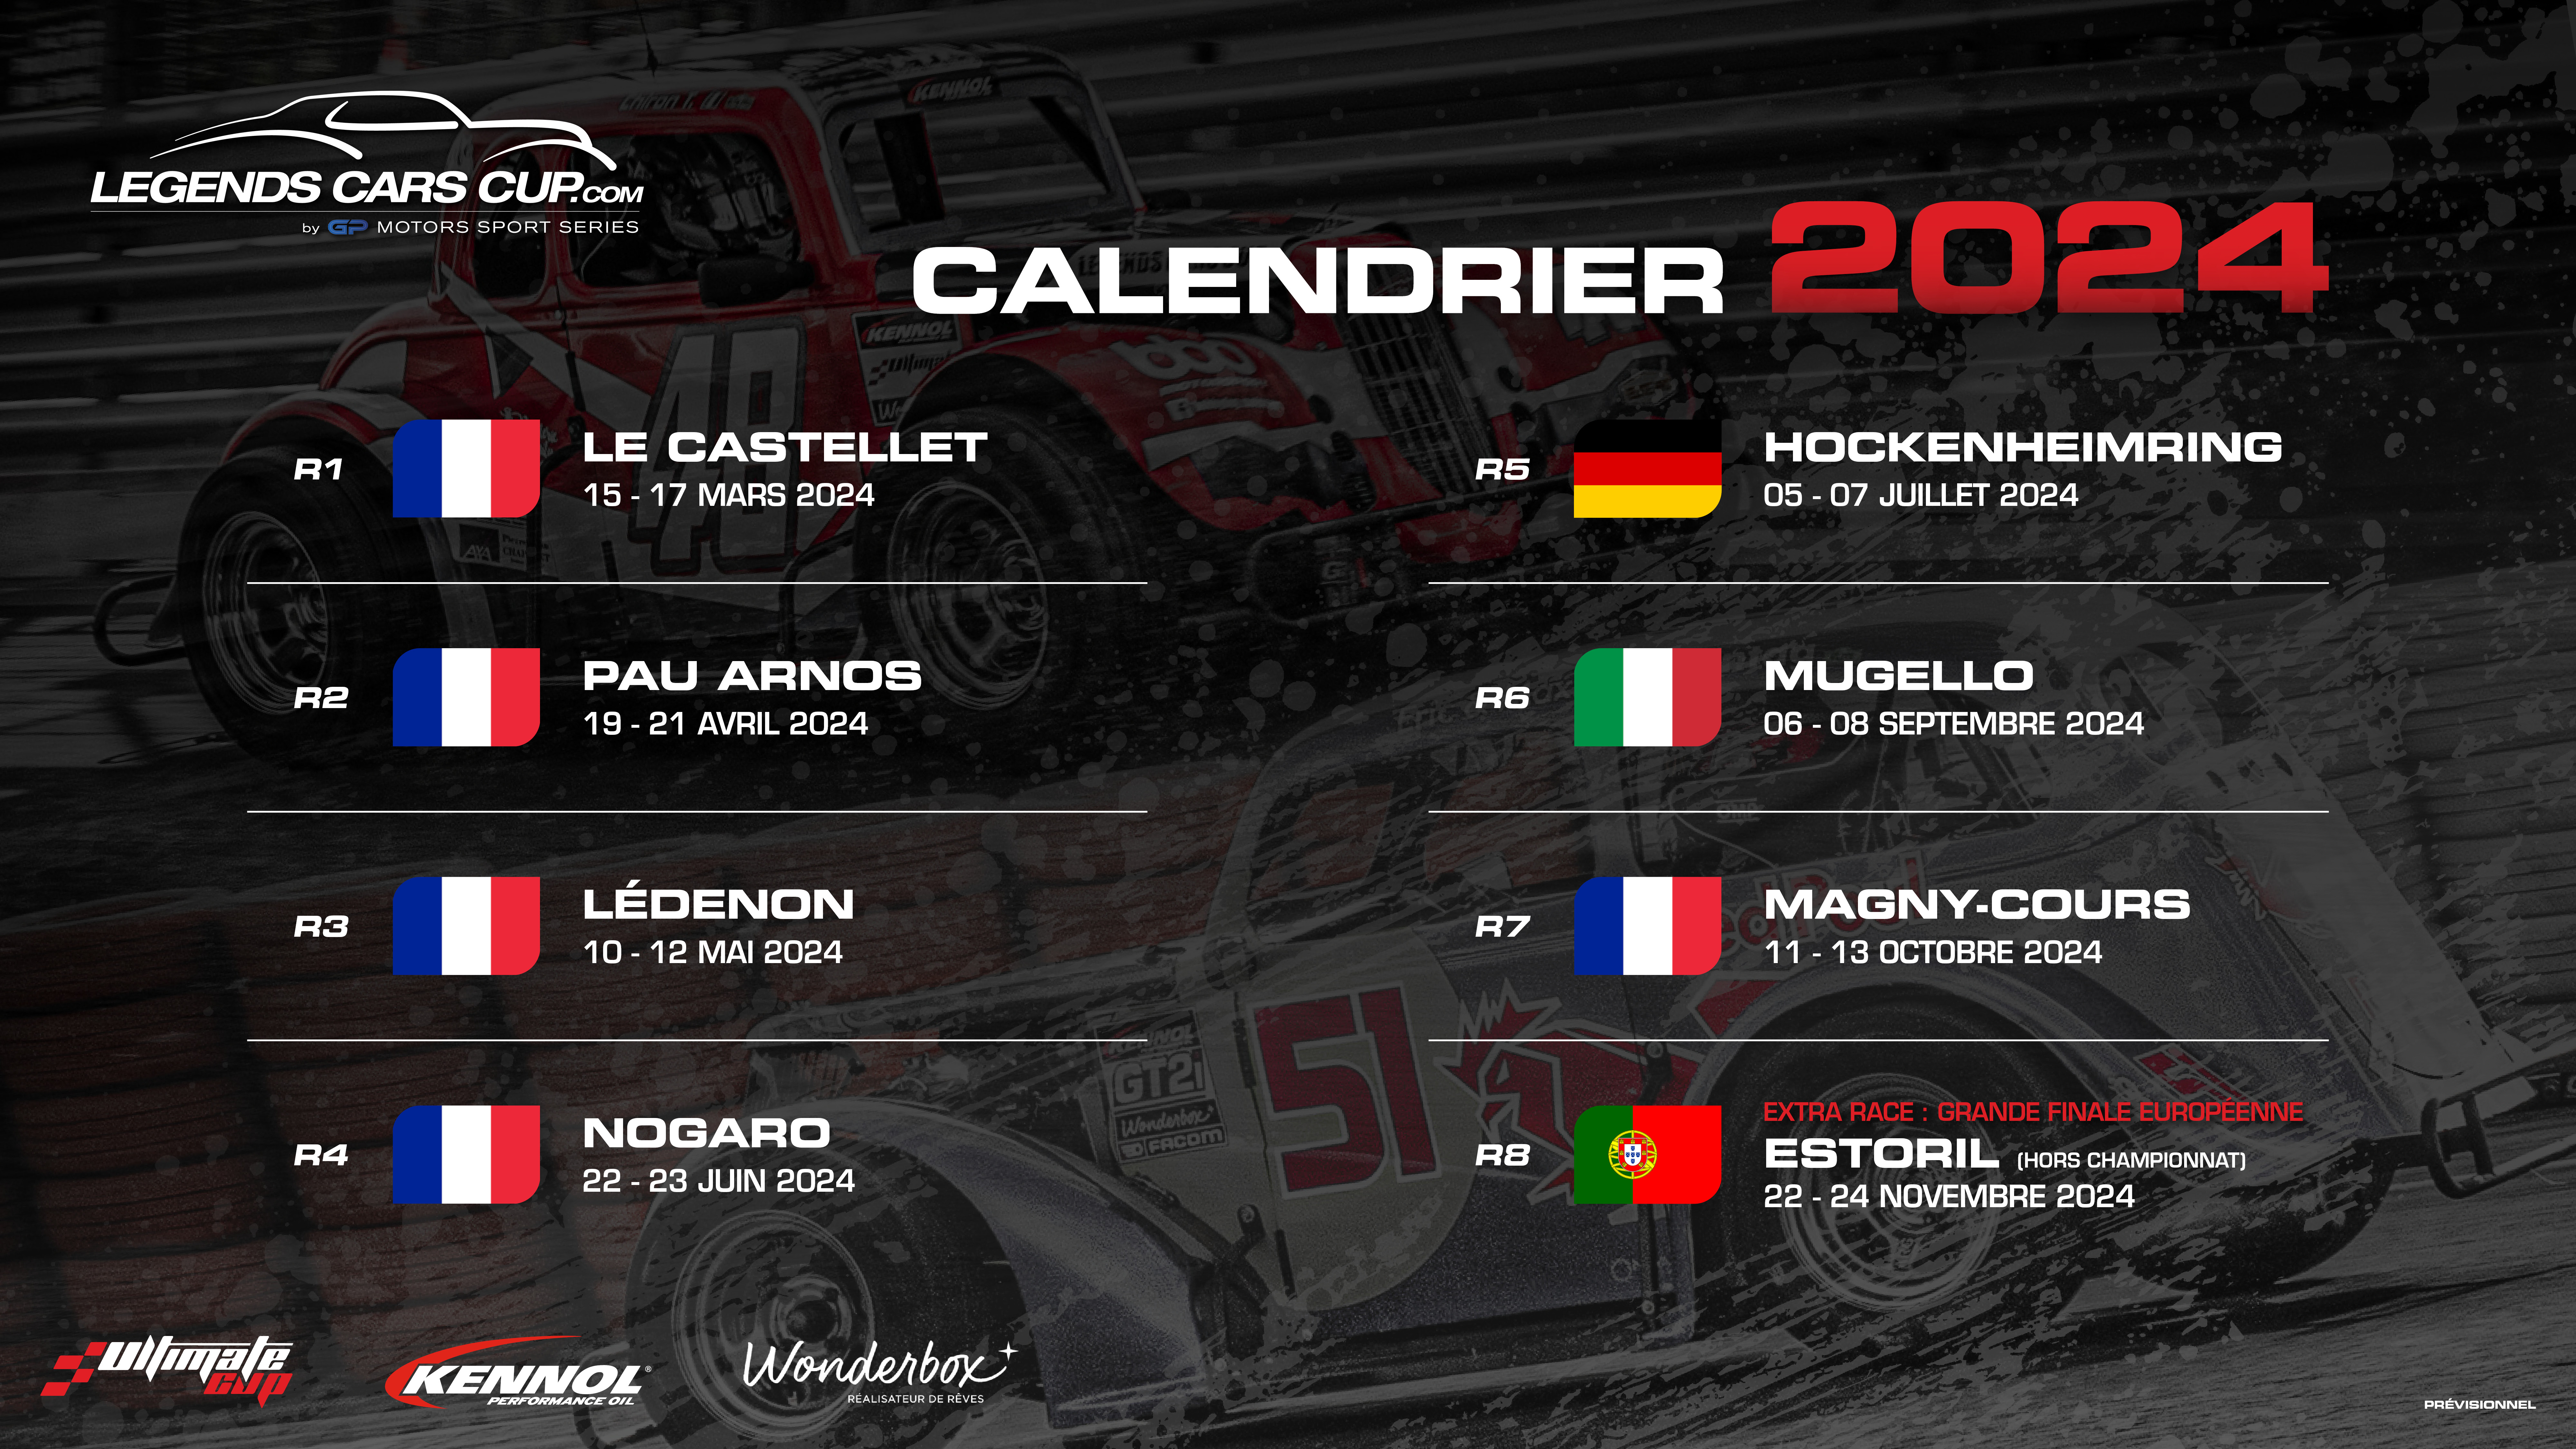 Calendrier 2023 Legends Cars Cup